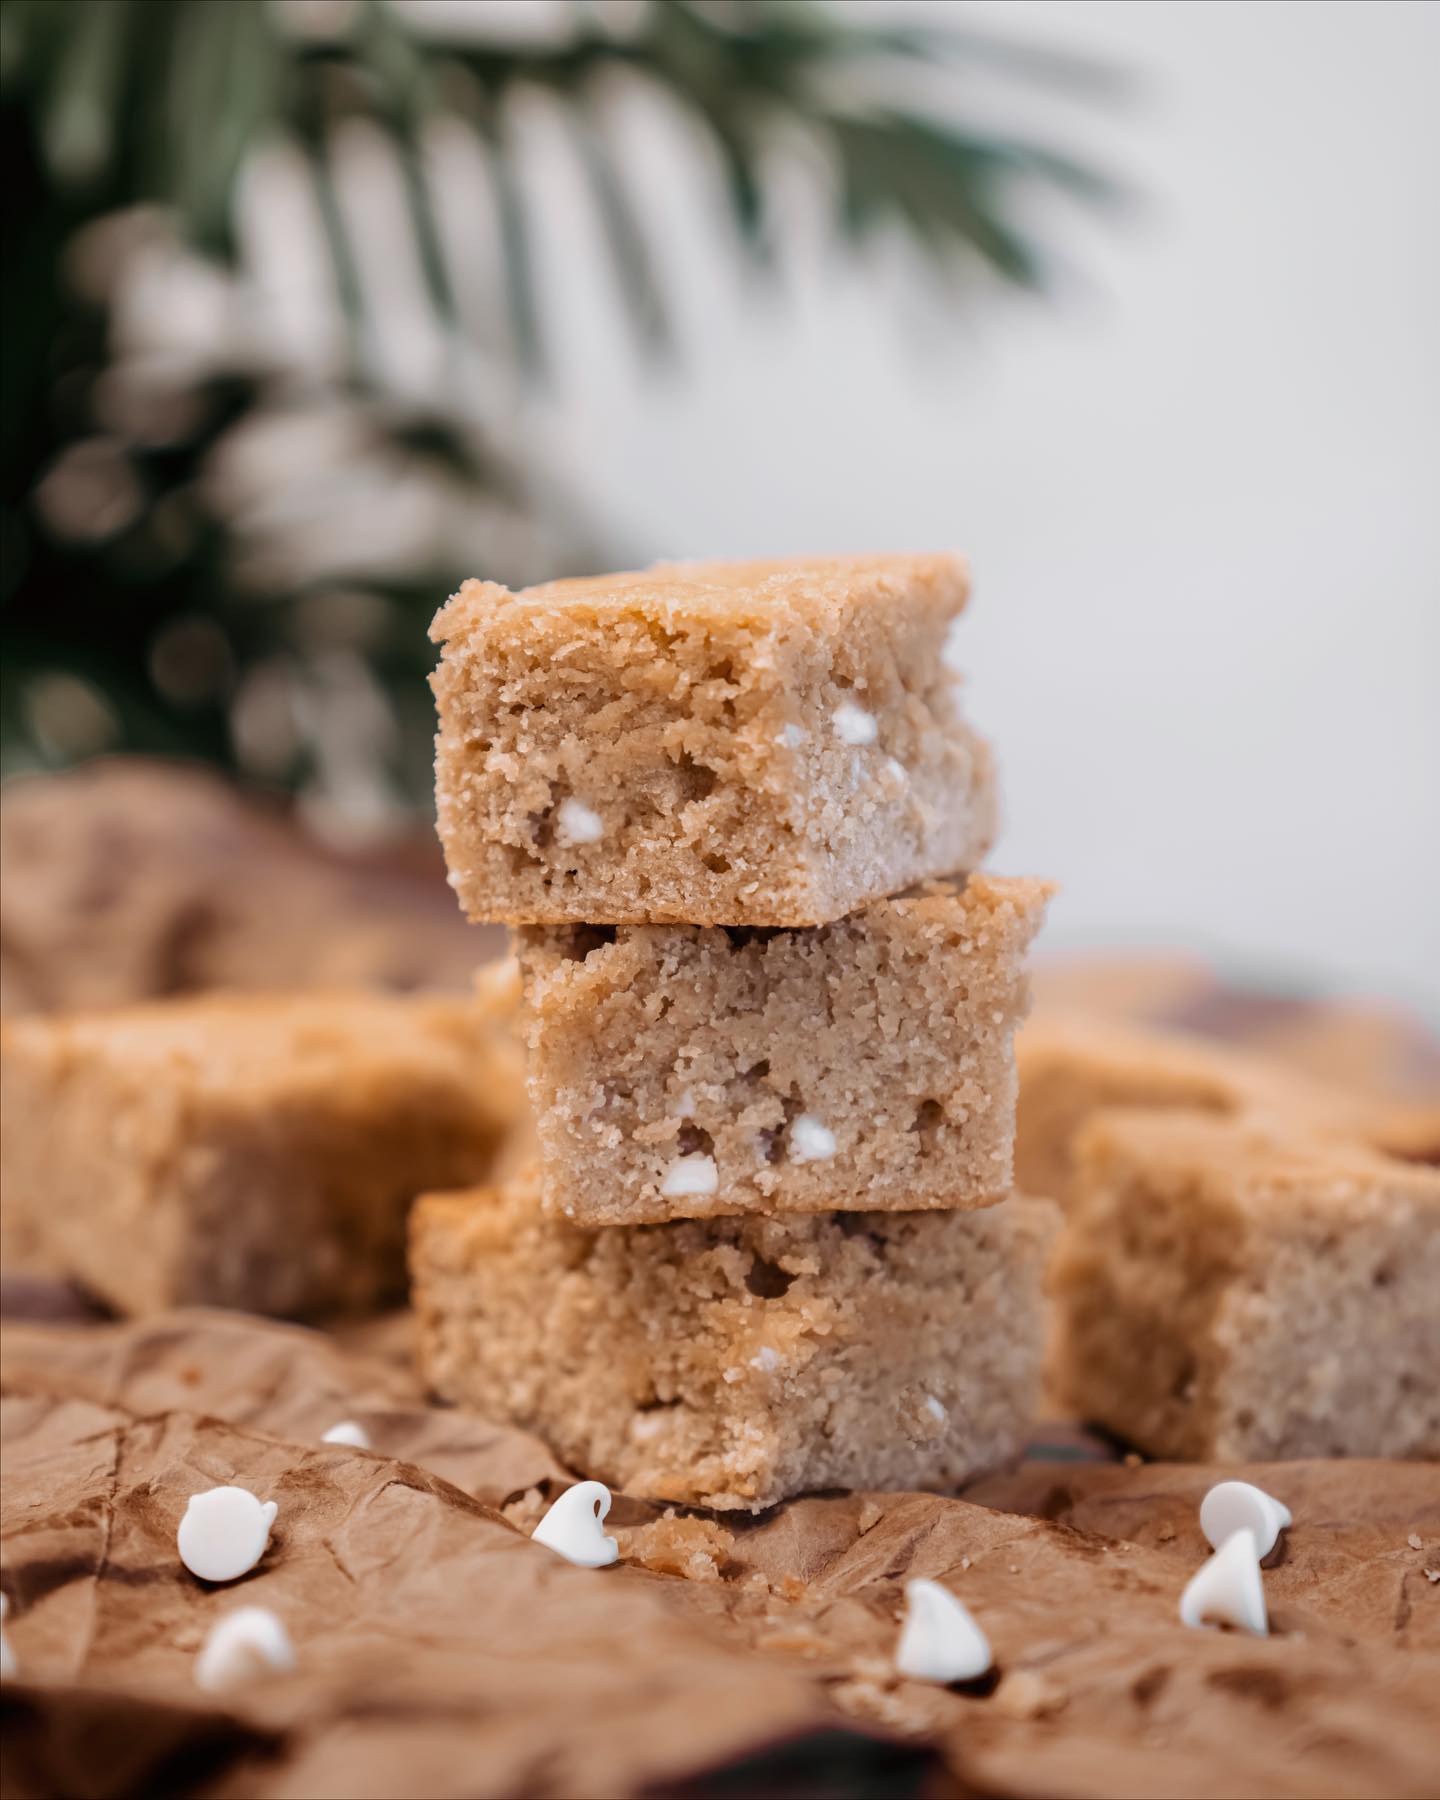 easy white chocolate blondies recipe for #nationalblondebrownieday 👩‍🍳✨

ingredients from @foodlandhi:
- 1 cup unsalted butter
- 1 1/2 cups Maika'i brown sugar
- 2 tsp vanilla extract
- 1 3/4 cups all purpose flour
- 1/2 cup white chocolate
- 1/2 tsp baking powder
- 1/2 tsp salt
- 2 eggs

preheat oven to 350 degrees and spray baking pan with cooing spray | mix melted butter and brown sugar | add eggs and vanilla extract | add flour, baking powder, and salt | pour the batter into the pan | bake for 25-30 minutes or until golden - enjoy!

Optional (but highly encouraged) tip: top it off with vanilla ice cream 🍨 

#AMaikaiDay #FoodlandHi